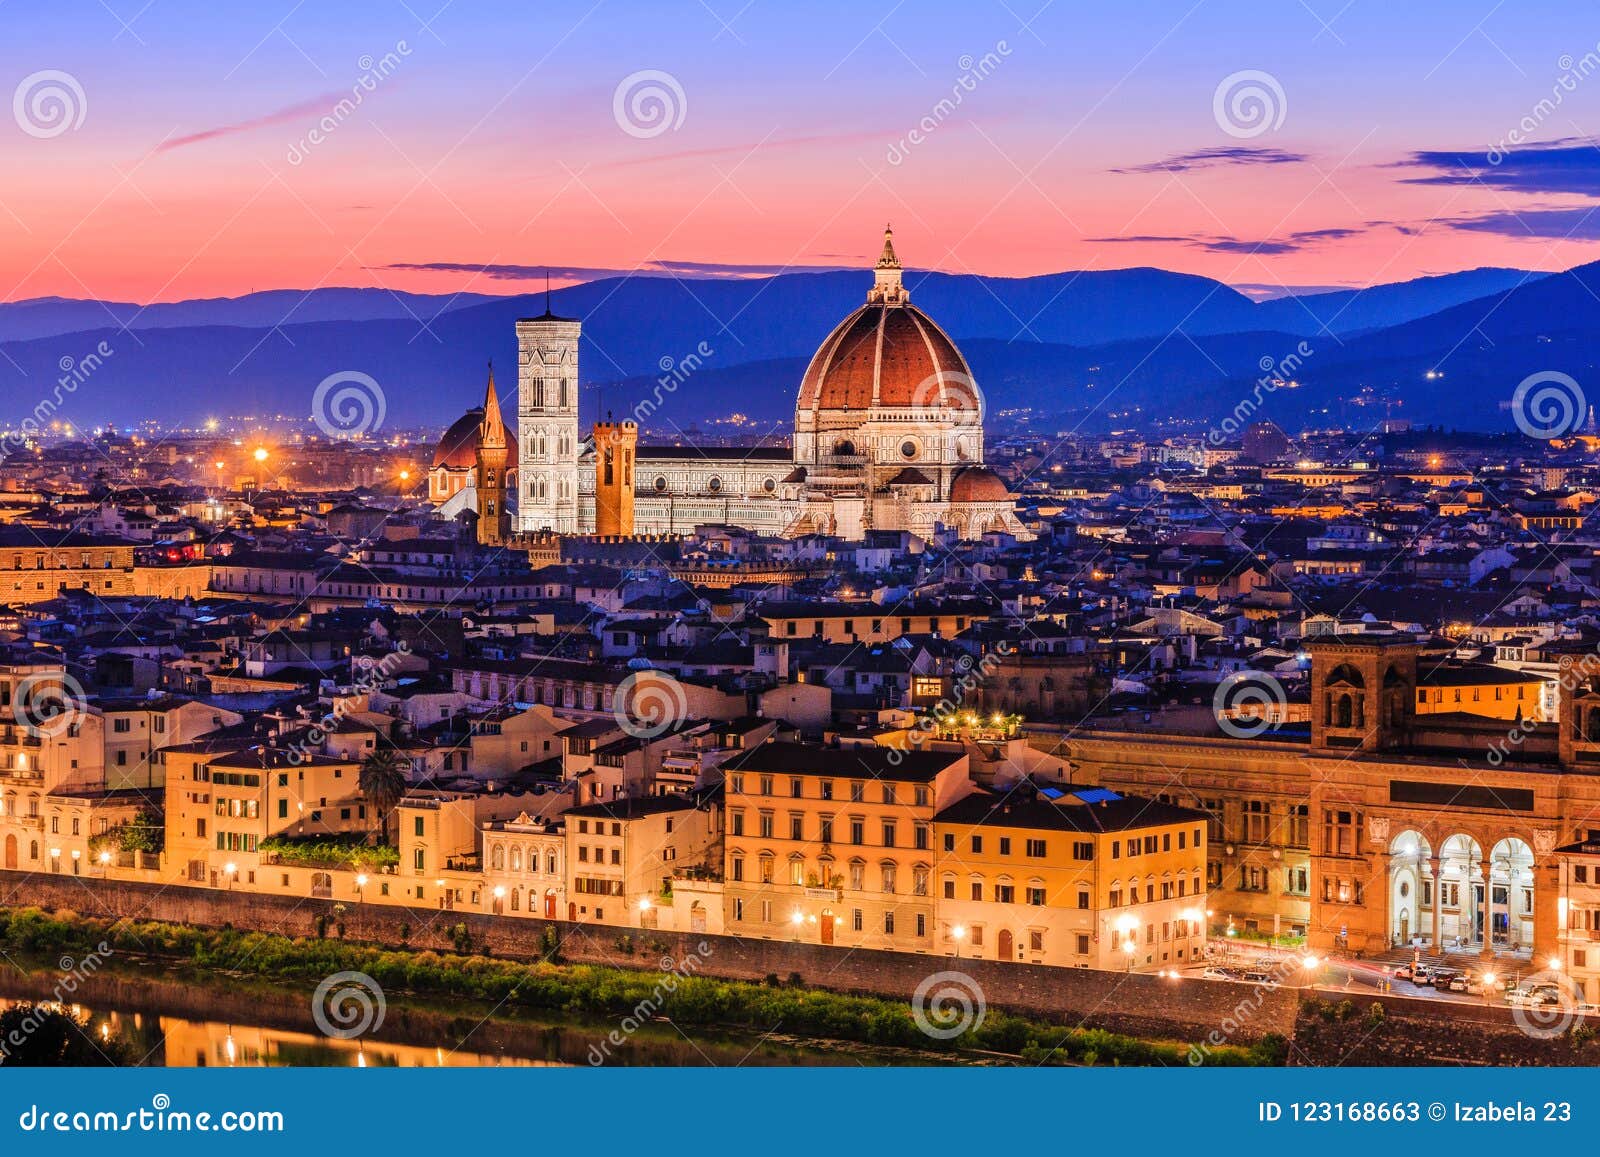 florence, italy. view of the cathedral santa maria del fiore.